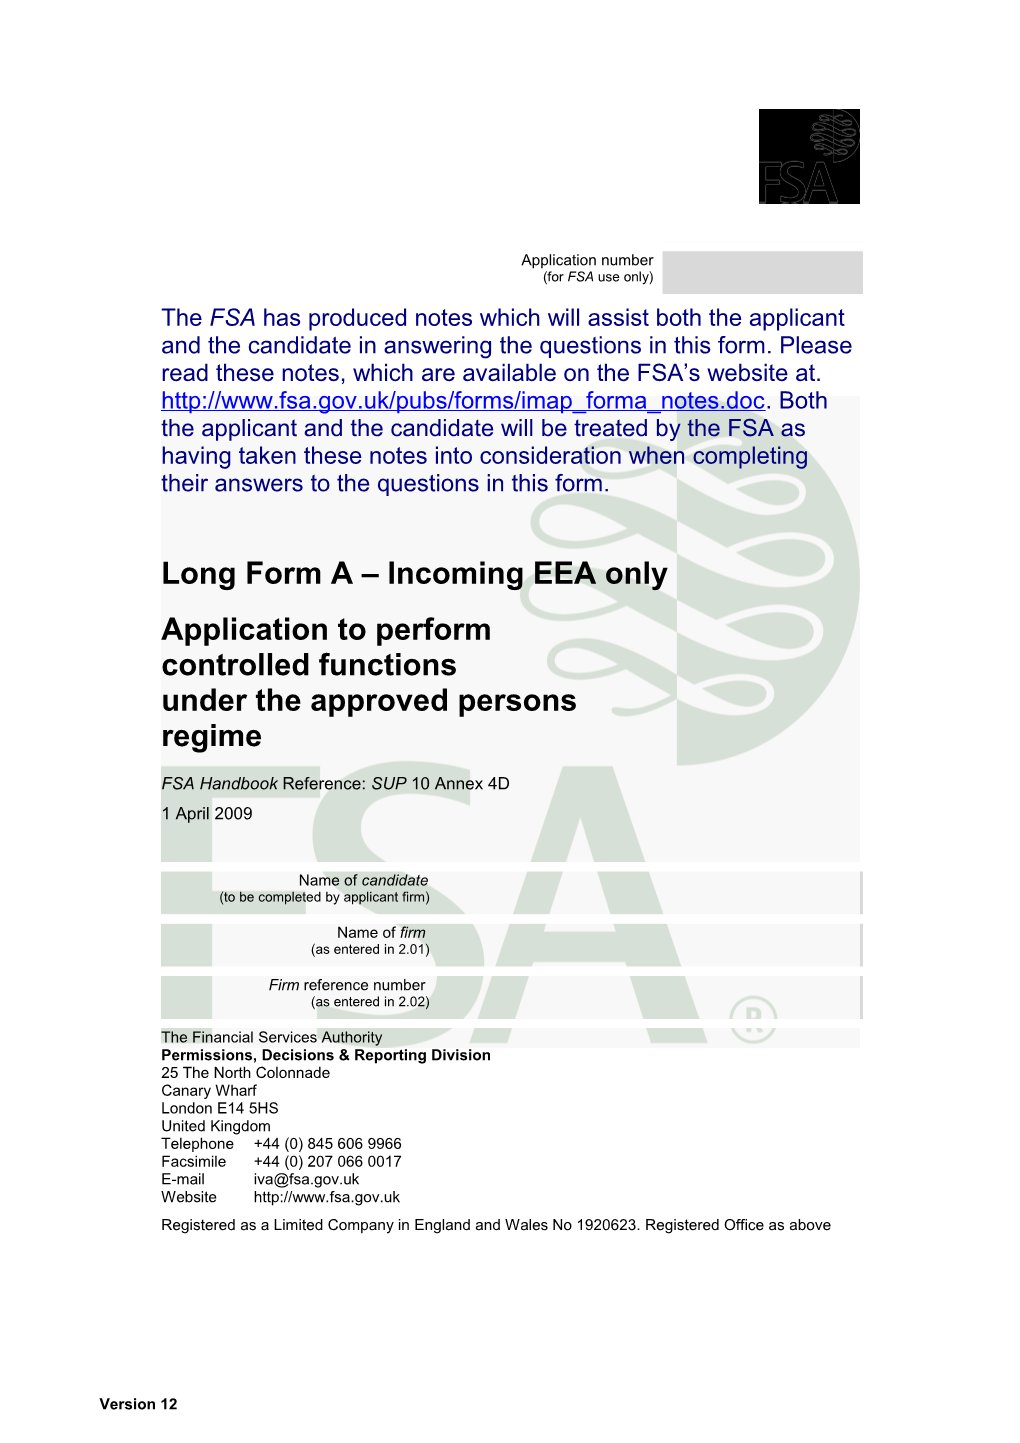 Long Form a - Incoming EEA Only: Application to Perform Controlled Functions Under The